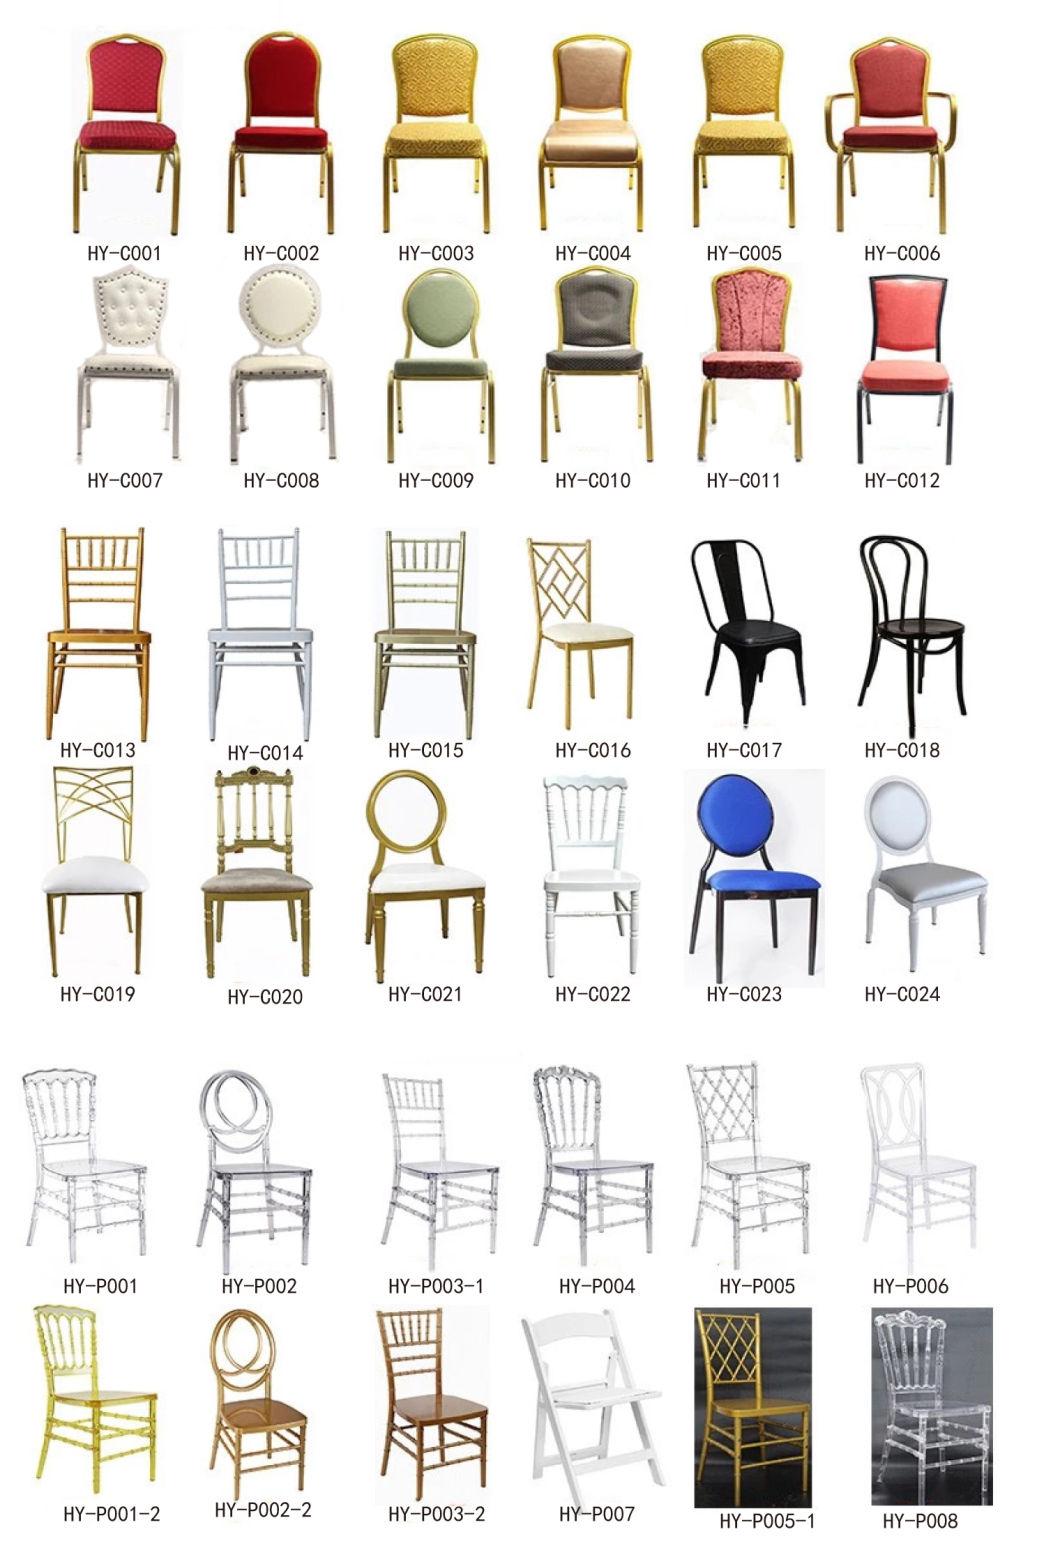 Rose Gold Stainless Steel White Wedding Chairs Product Home Furniture Dining Chairs Hotel Metal Stacking Restaurant Chiavari Dining Banquet Event Chair